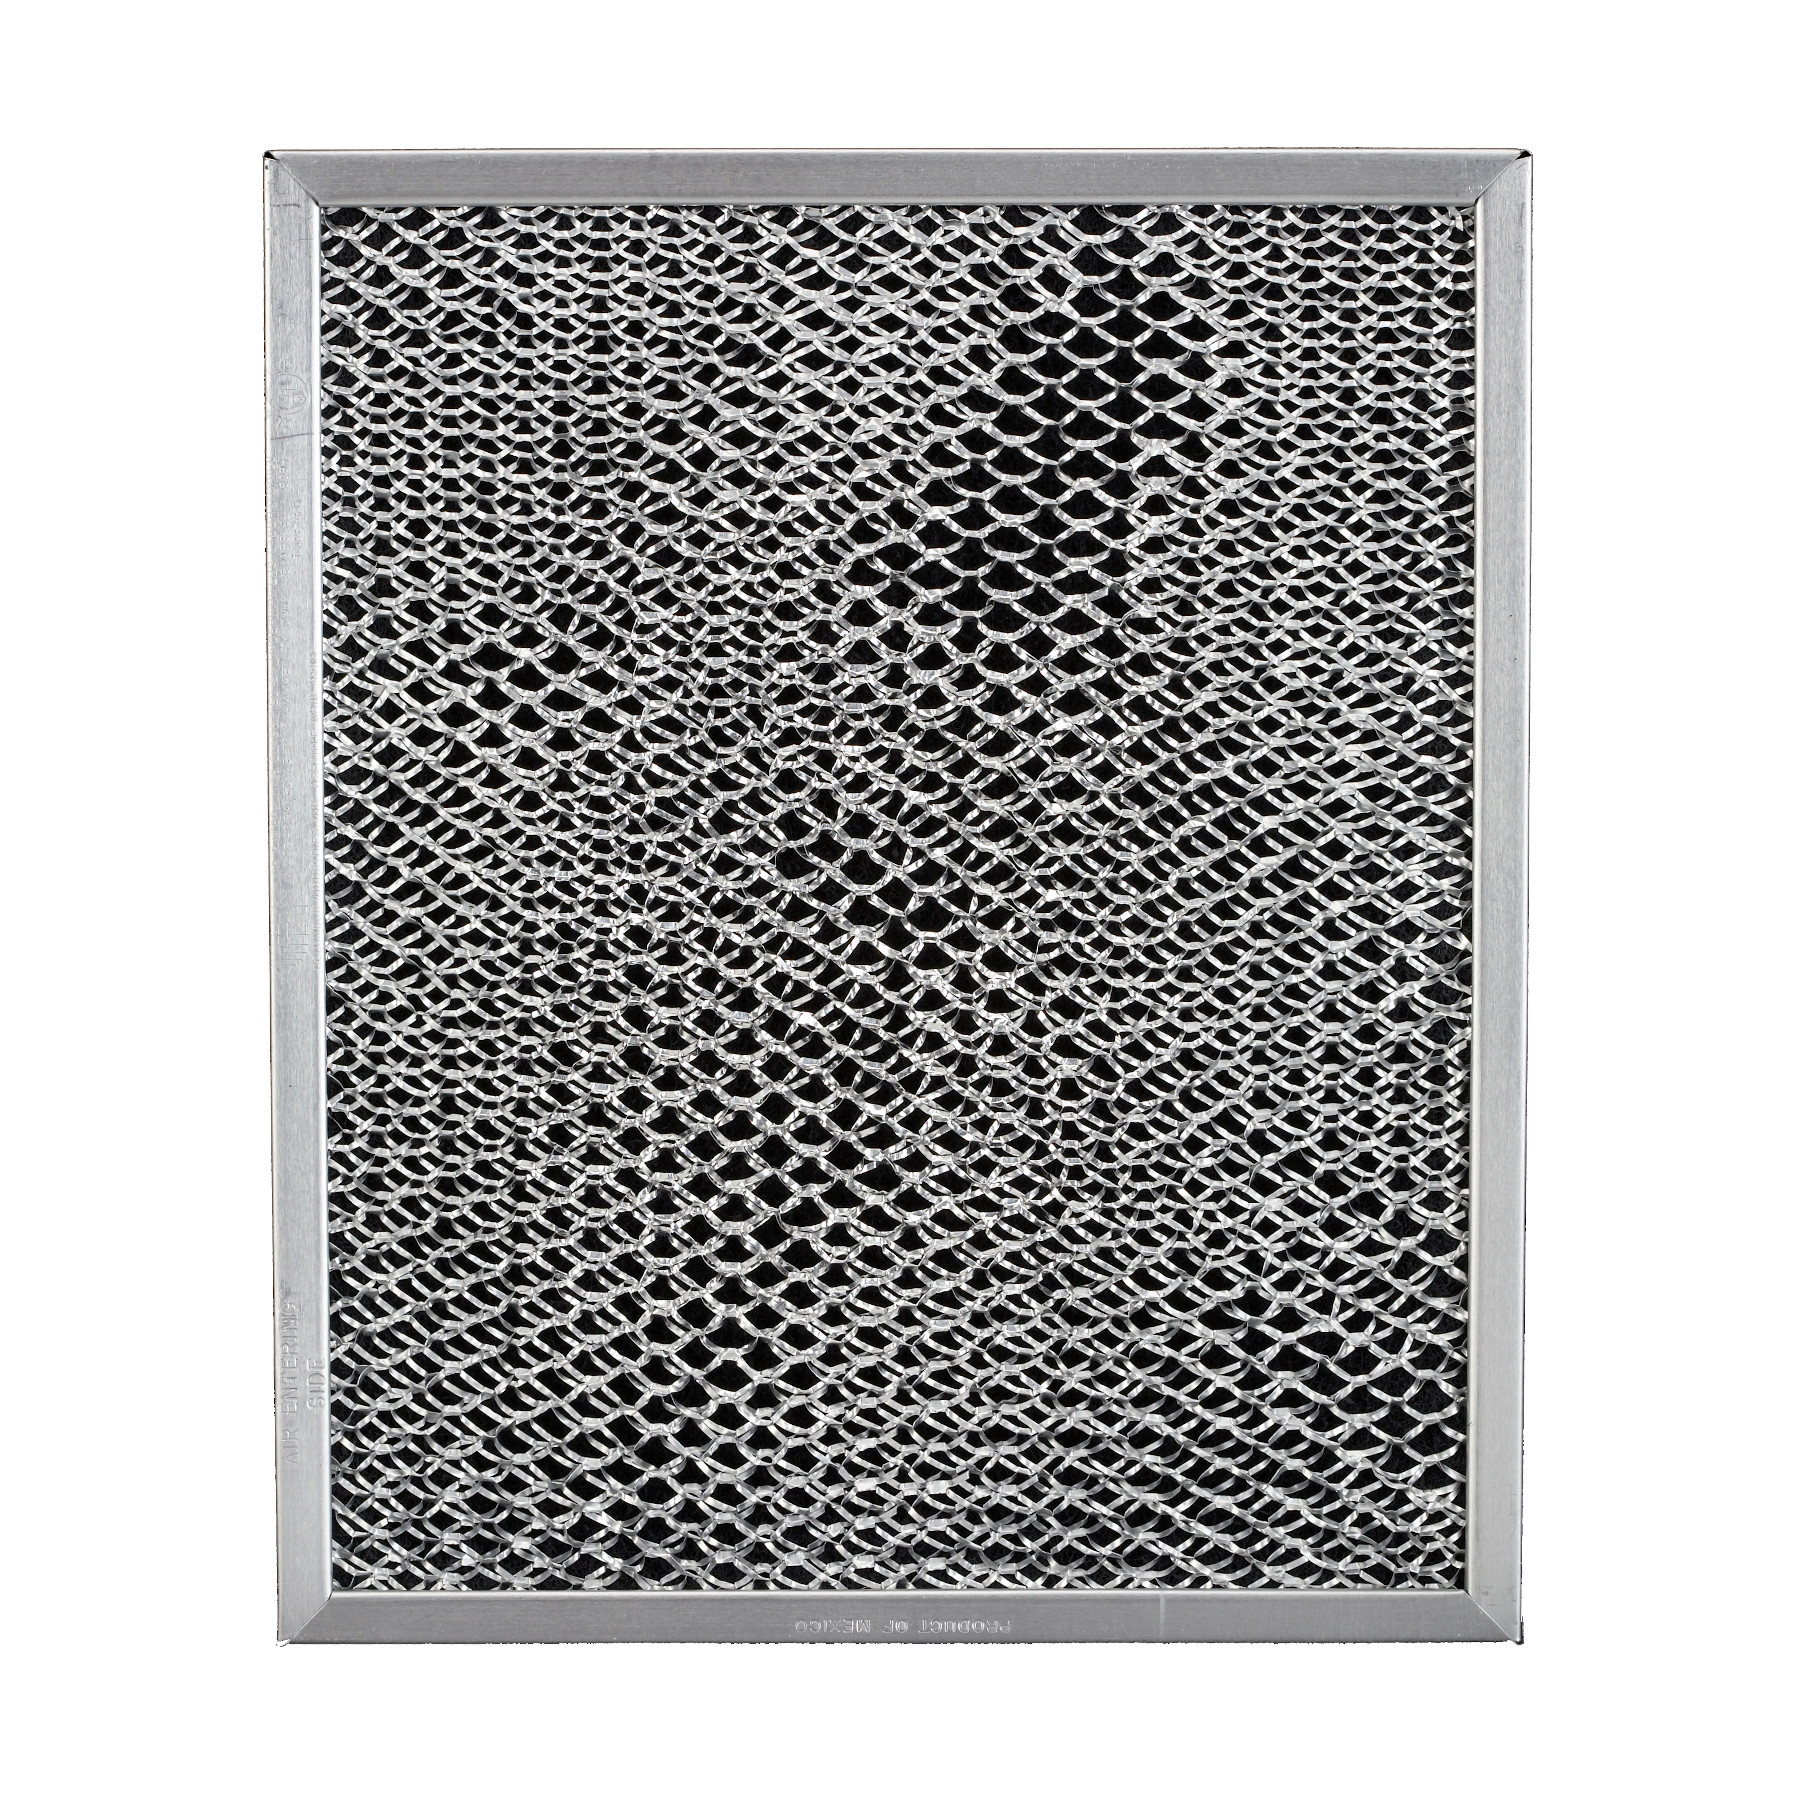 Broan Nutone LL62F  Range Hood Replacement Filter  NEW 